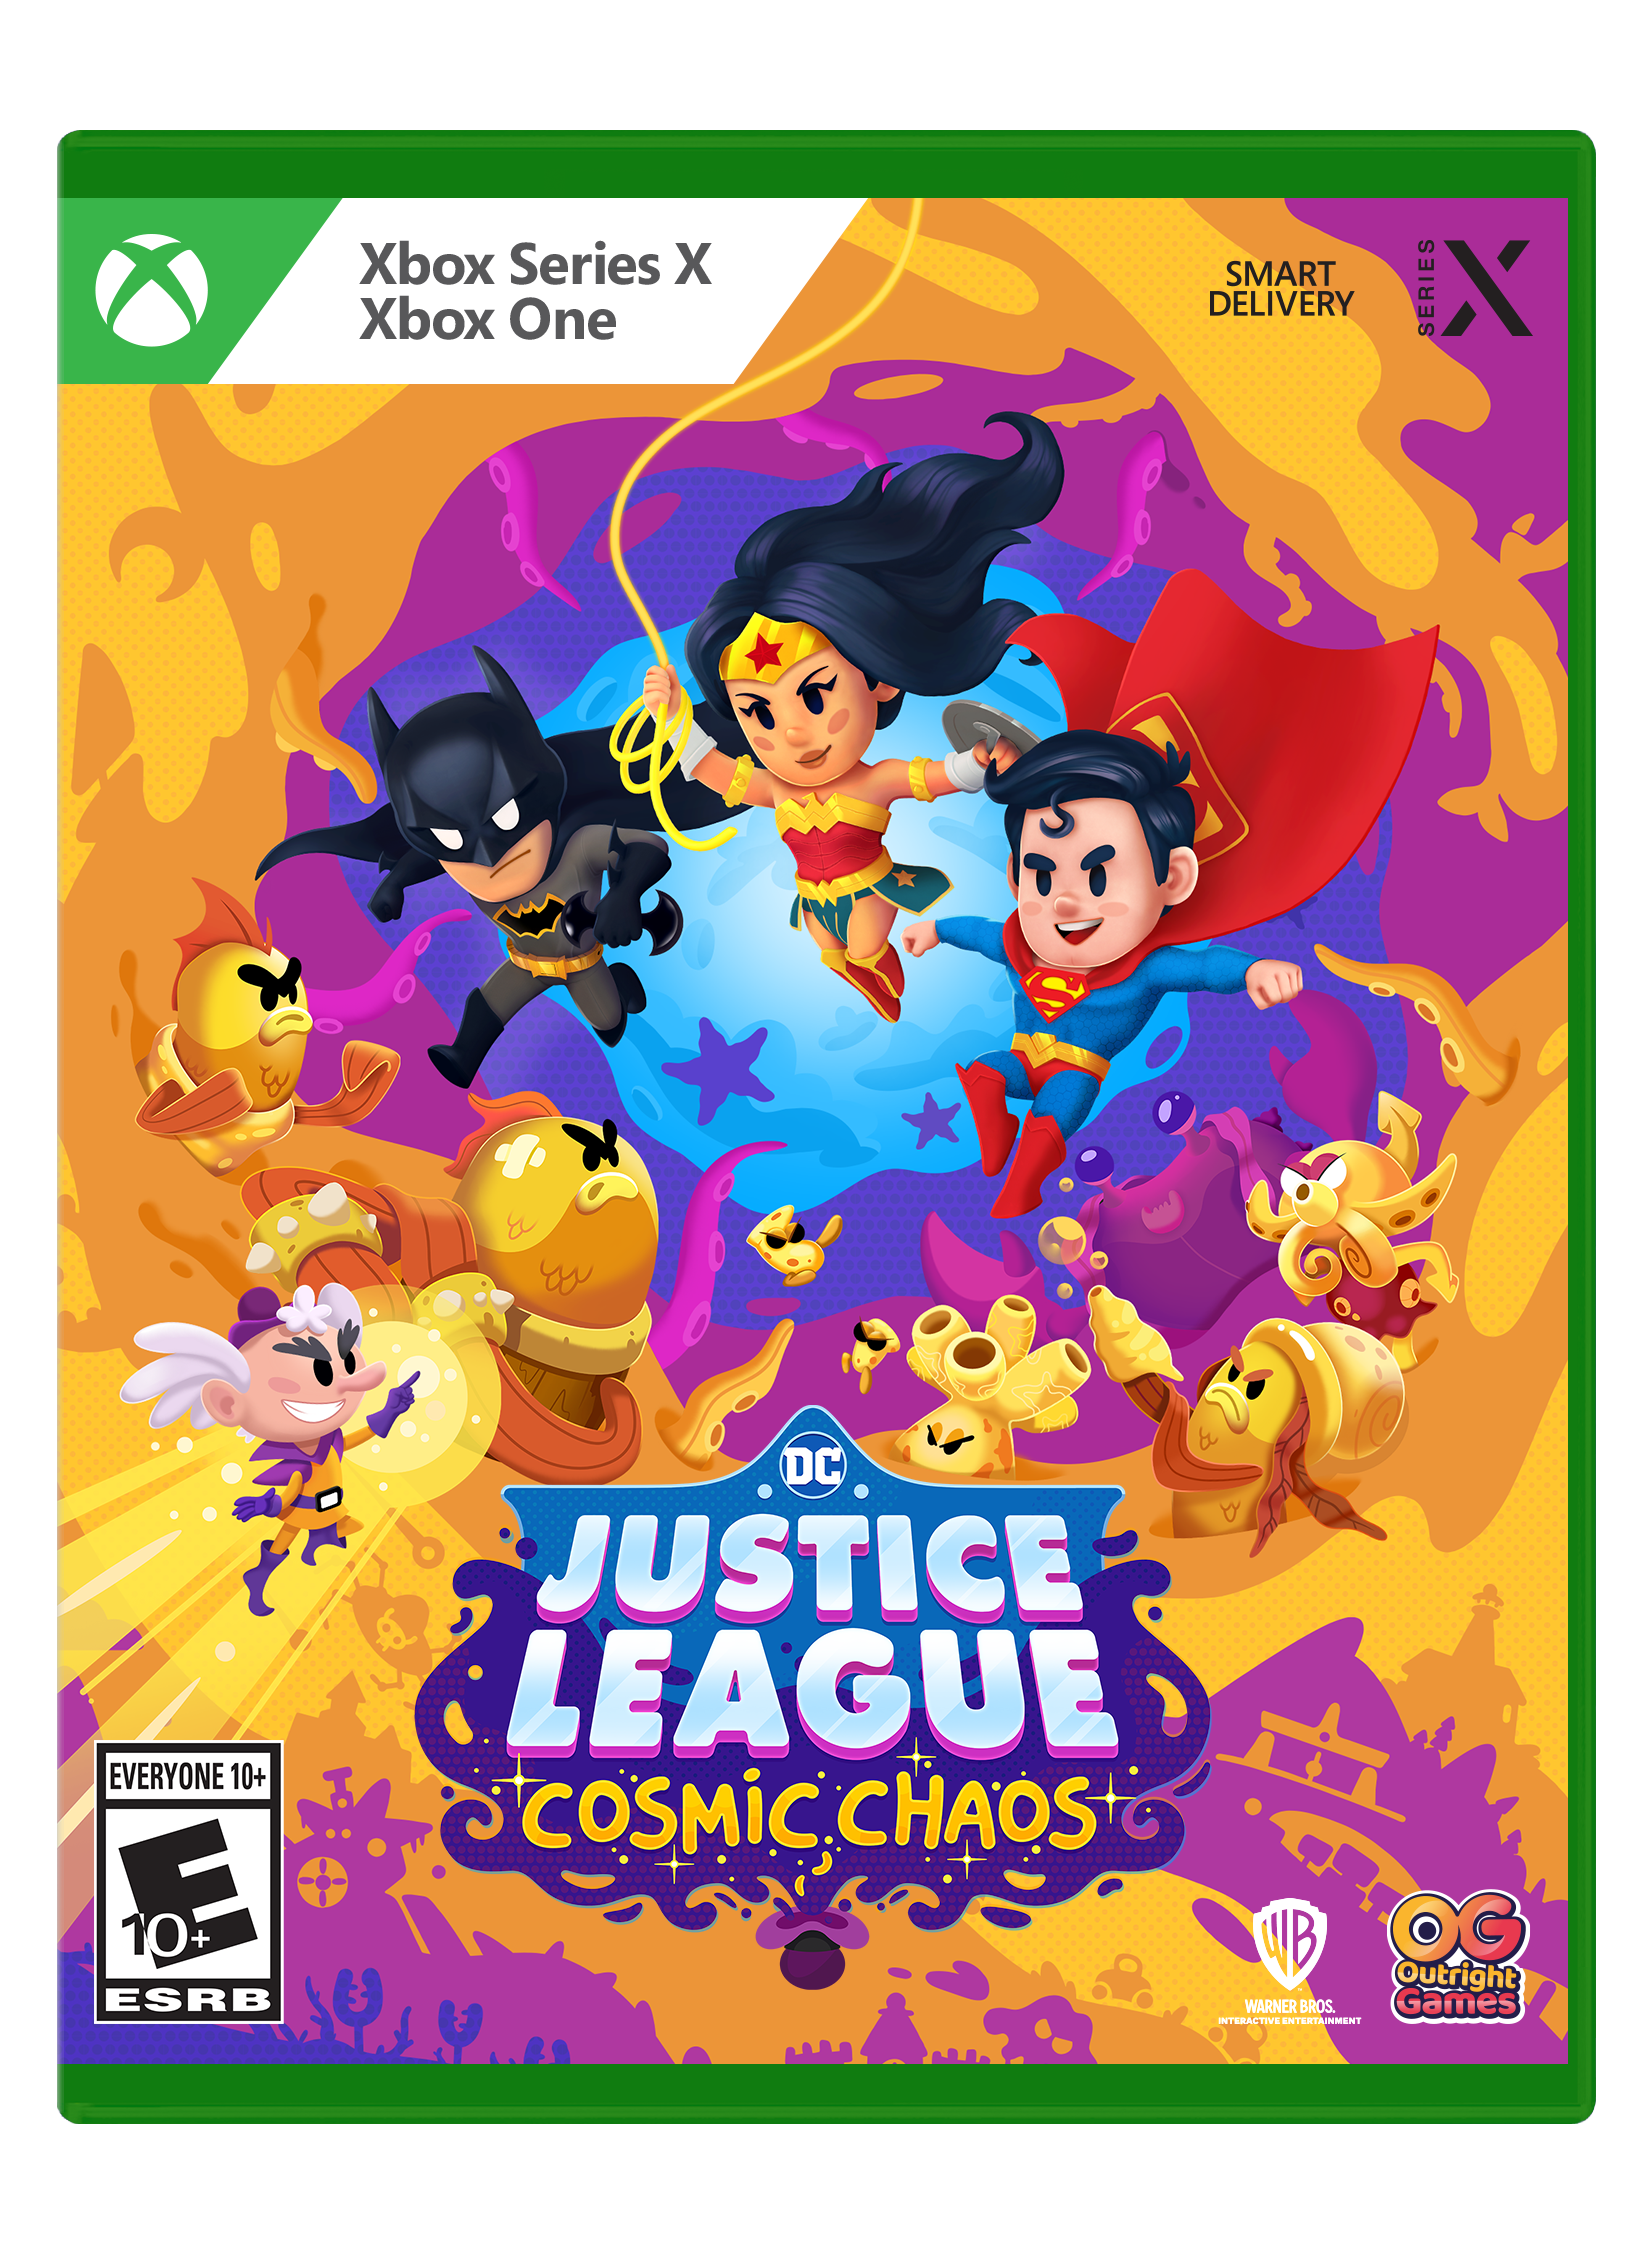 DC’s Justice League: Cosmic Chaos - Xbox Series X